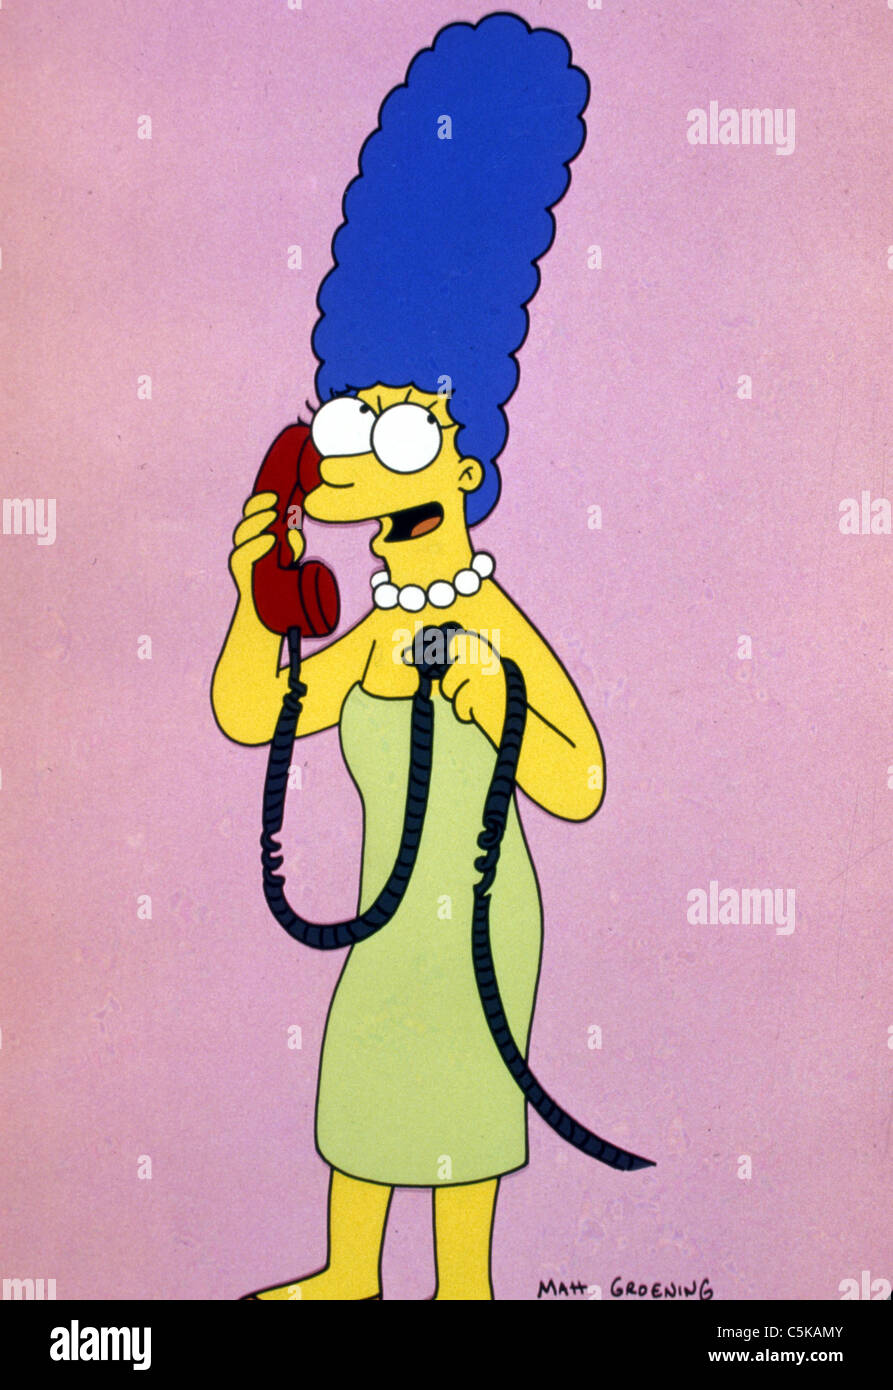 The Simpsons TV Series 1989 - ???? Created by Matt Groening Animation Marge Simpson Stock Photo